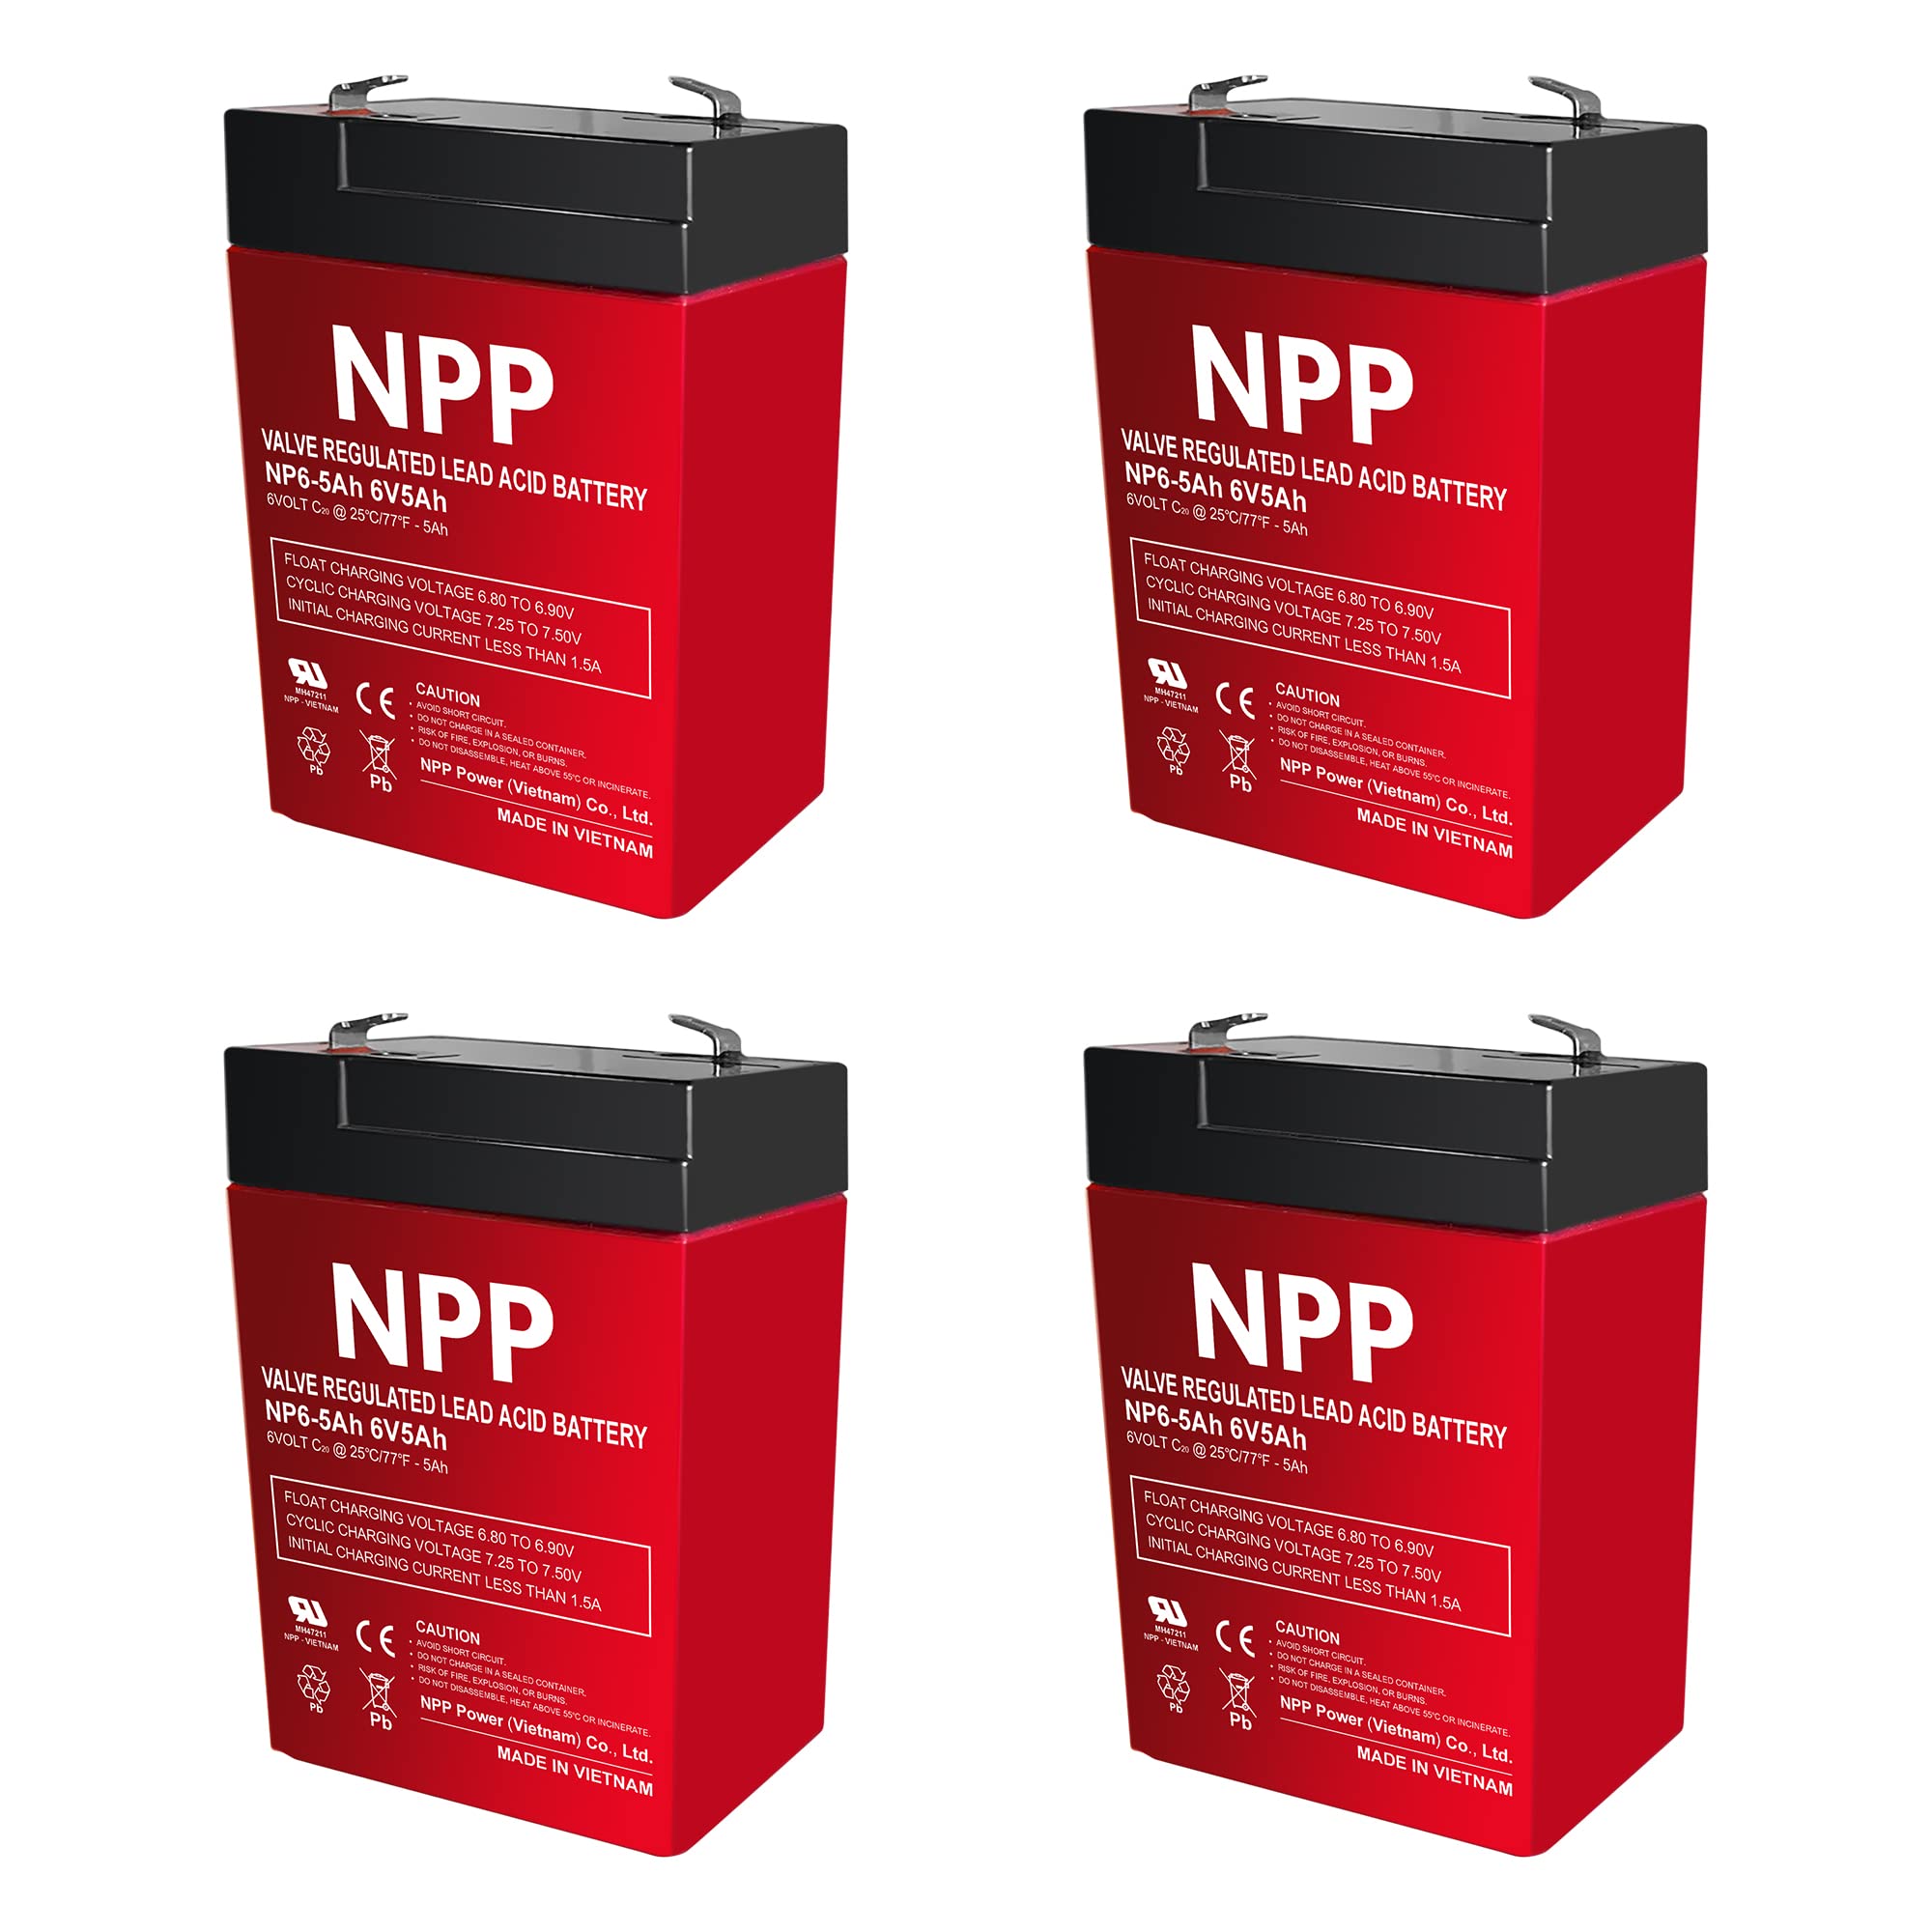 NPPower NP6-5Ah F1, 6V 5Ah Battery Rechargeable Sealed Lead Acid 6V 5 Ah Battery for Ride on Toy, Solar System, Emergency Light, UPS, Alarm System,...